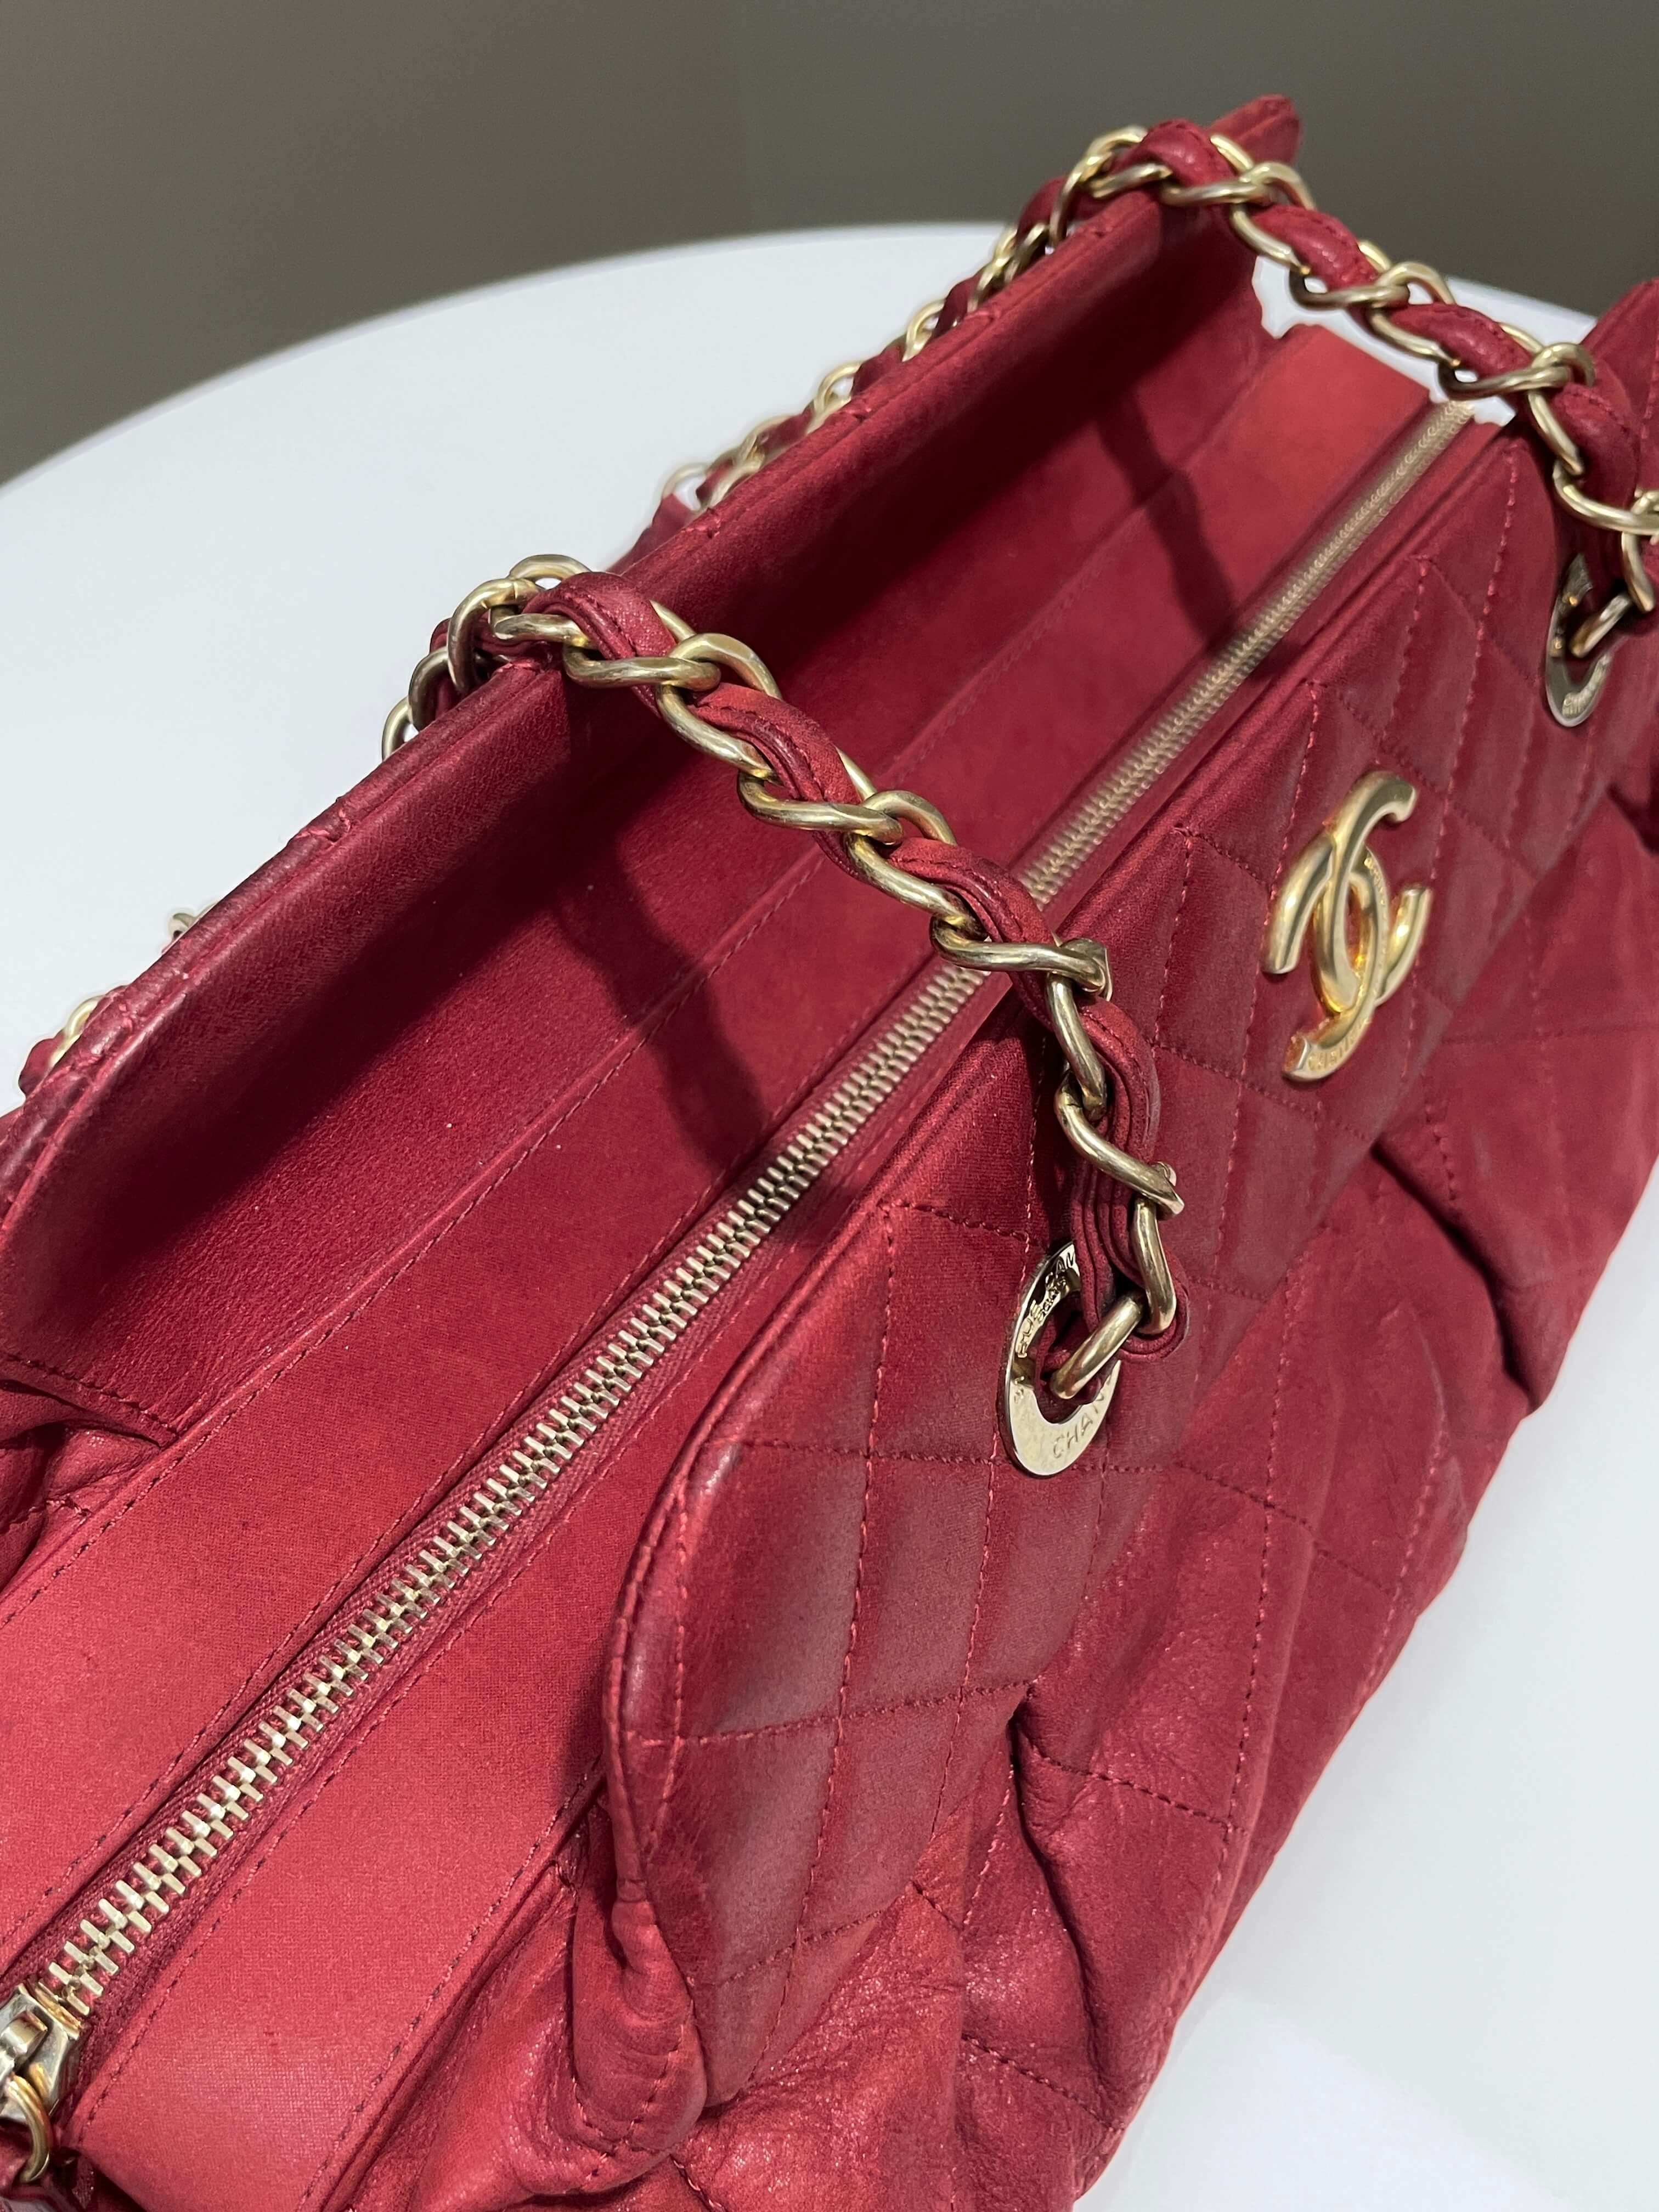 Chanel Cc Quilted Chain Shoulder Bag Red Calfskin